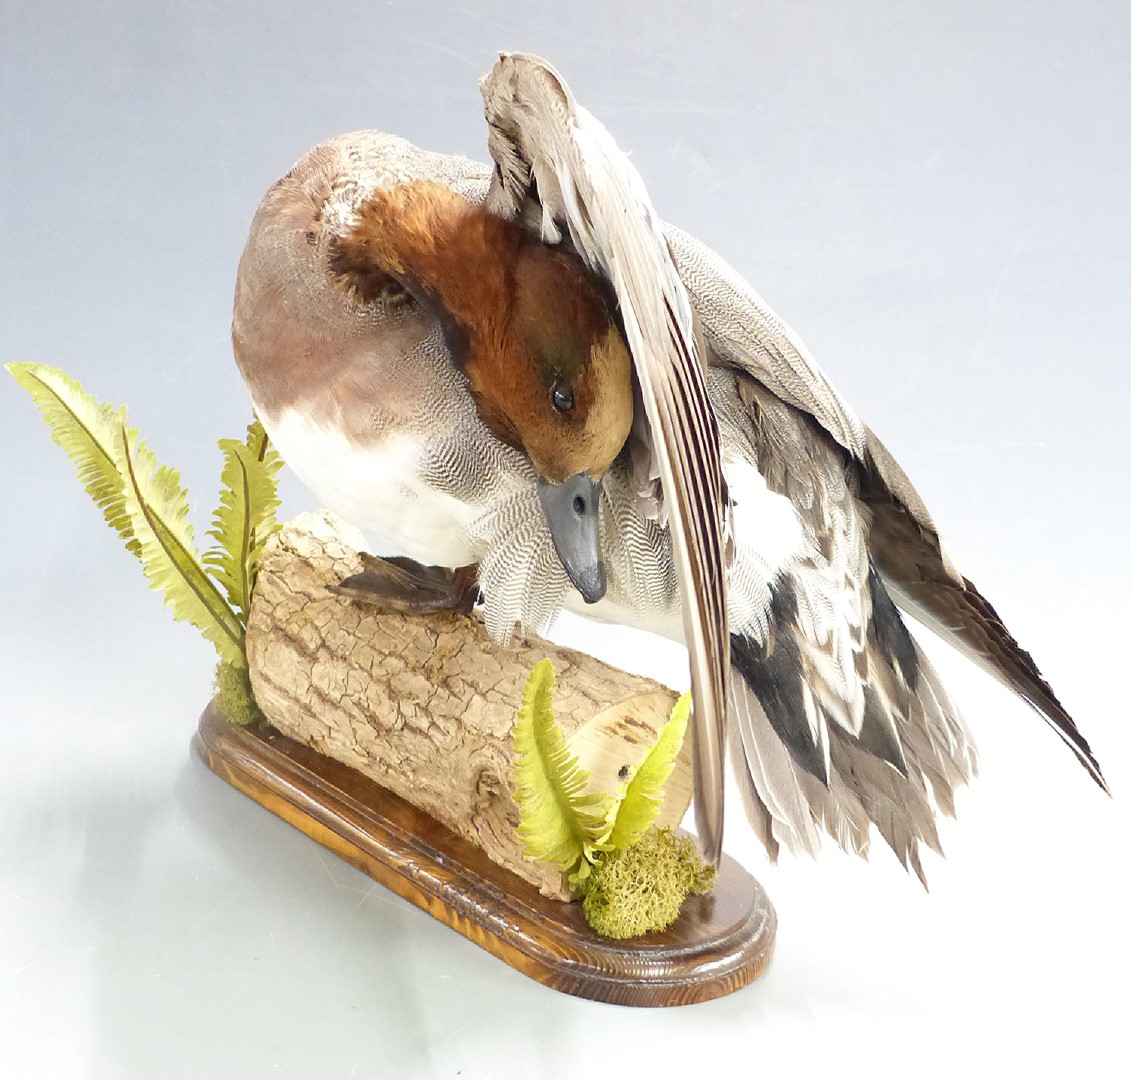 Taxidermy study of a Widgeon duck raised on a log with two ferns, H27cm - Image 4 of 4